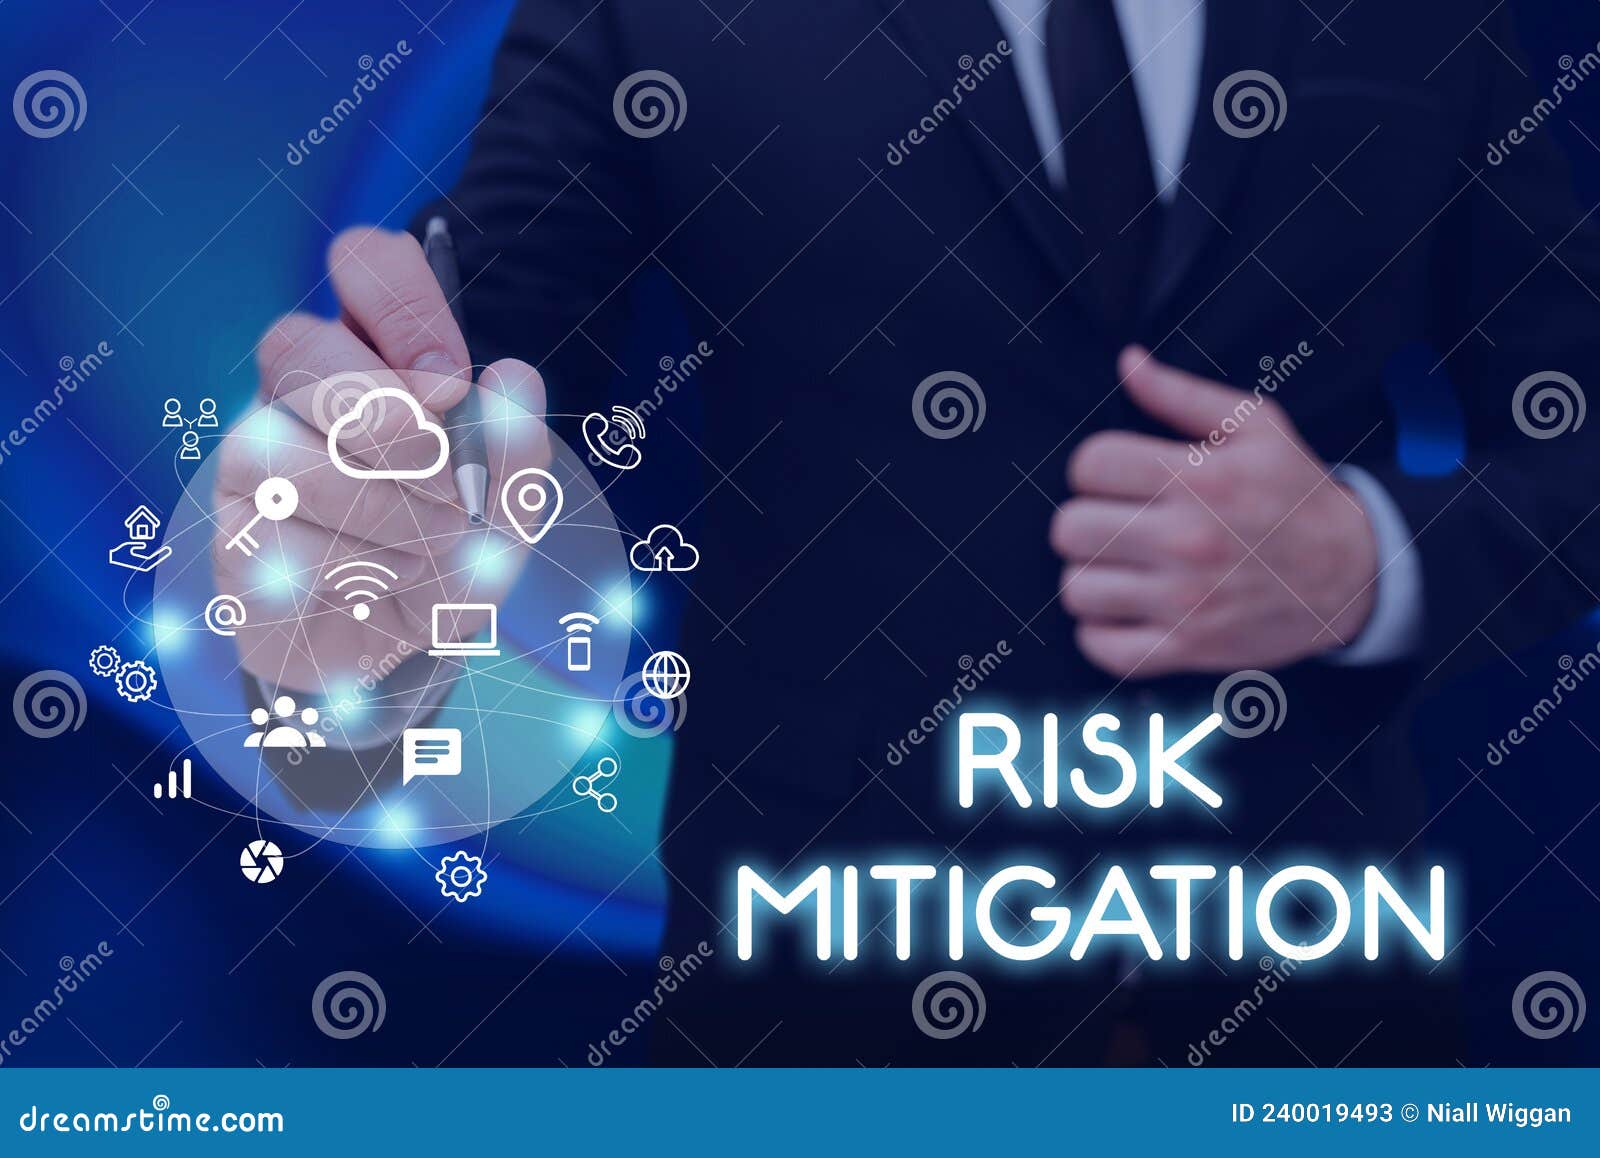 conceptual display risk mitigation. business showcase strategy to prepare for and lessen the effects of threats man